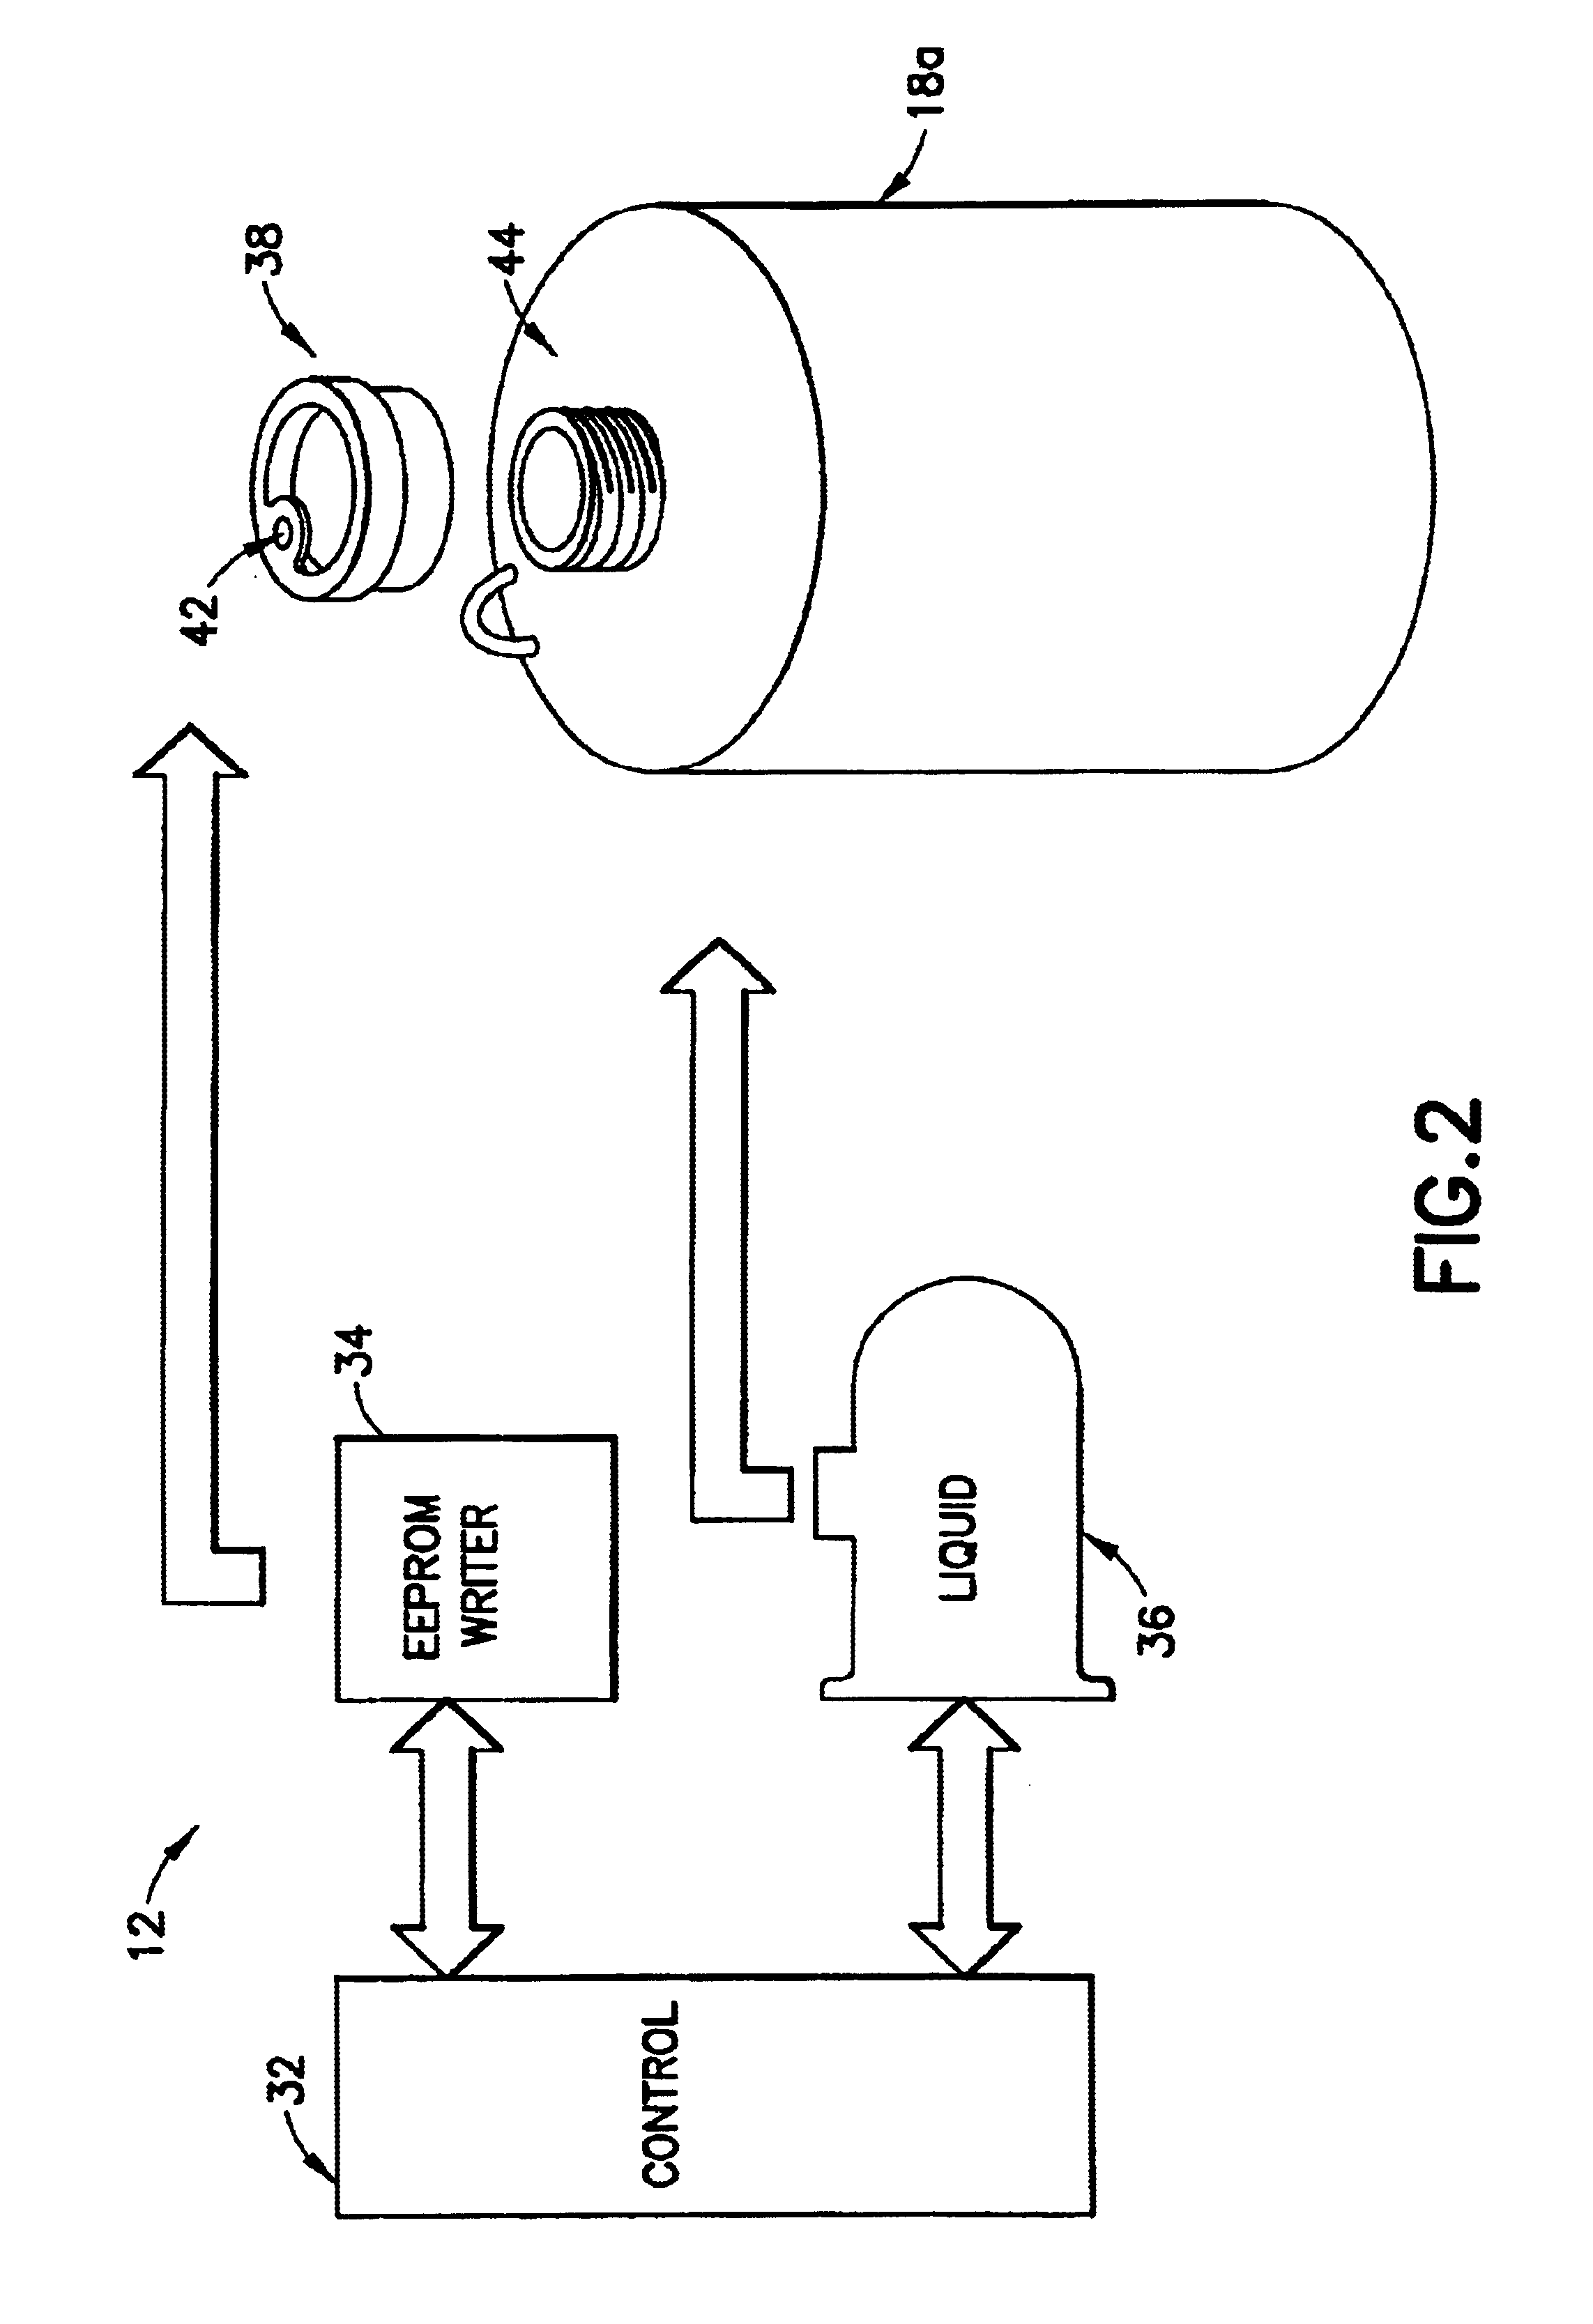 Liquid handling system with electronic information storage